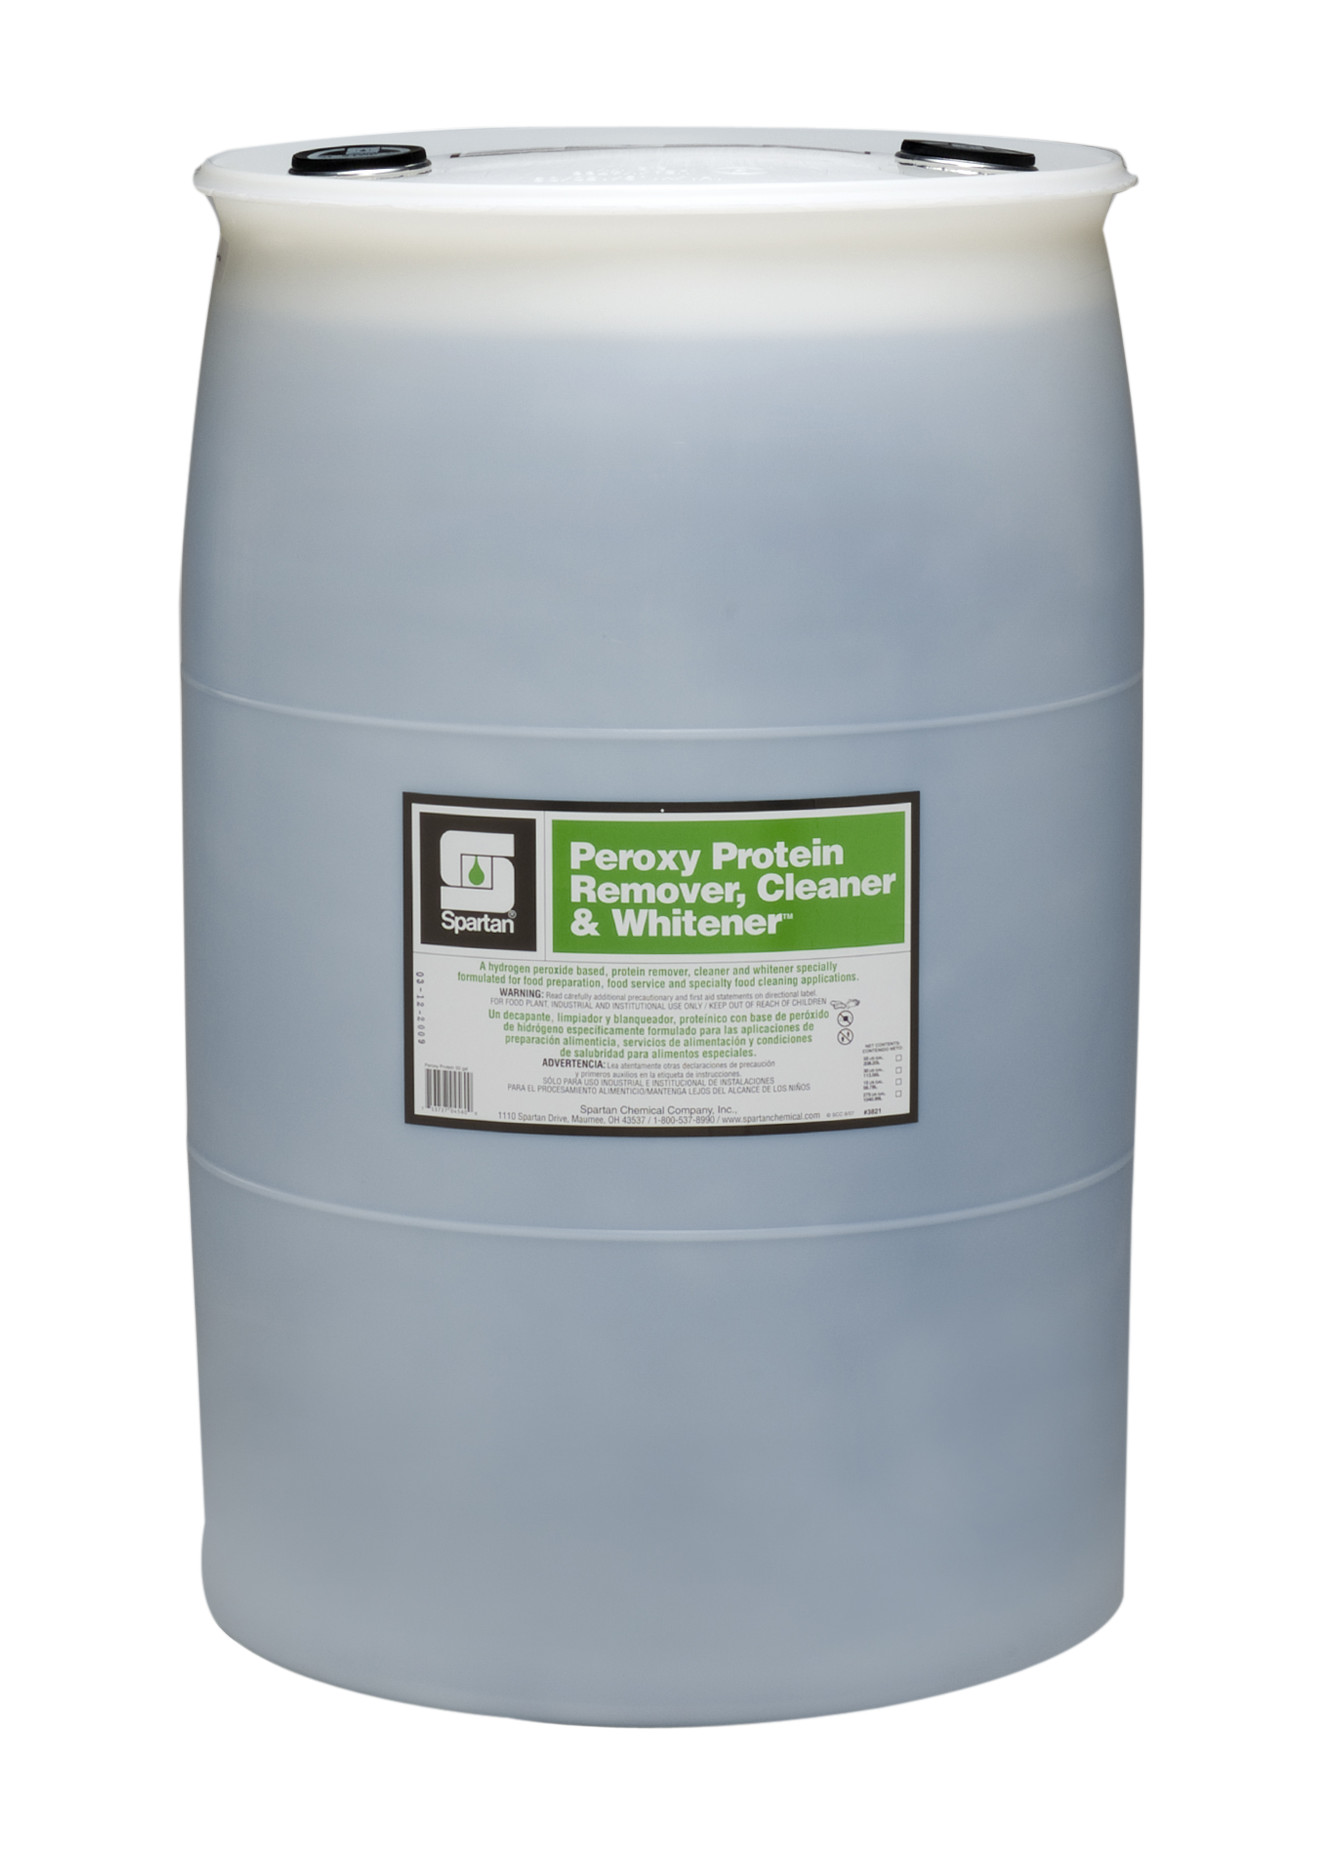 Spartan Chemical Company Peroxy Protein Remover, Cleaner & Whitener, 55 GAL DRUM